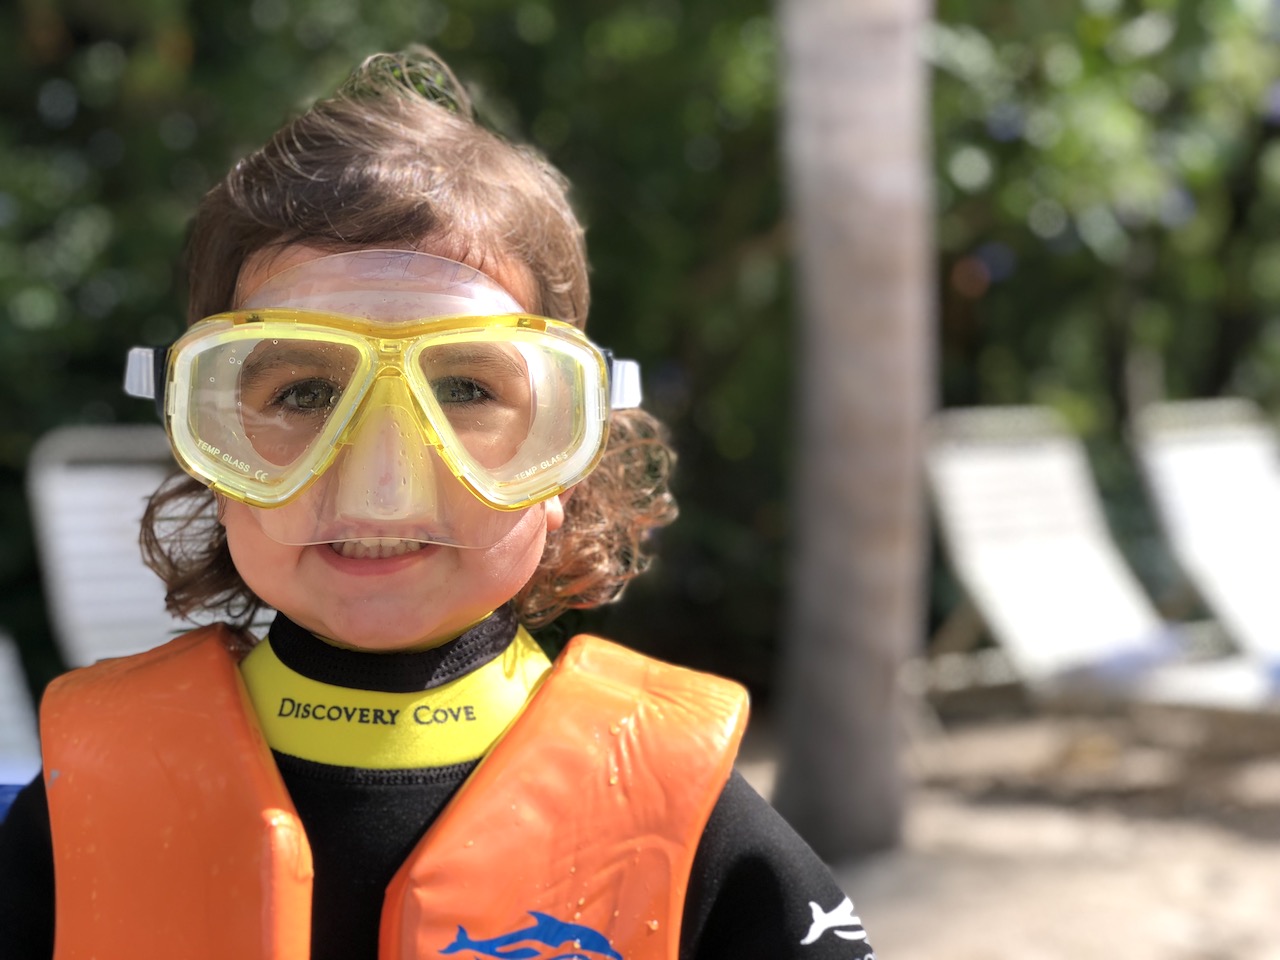 Discovery Cove Elin